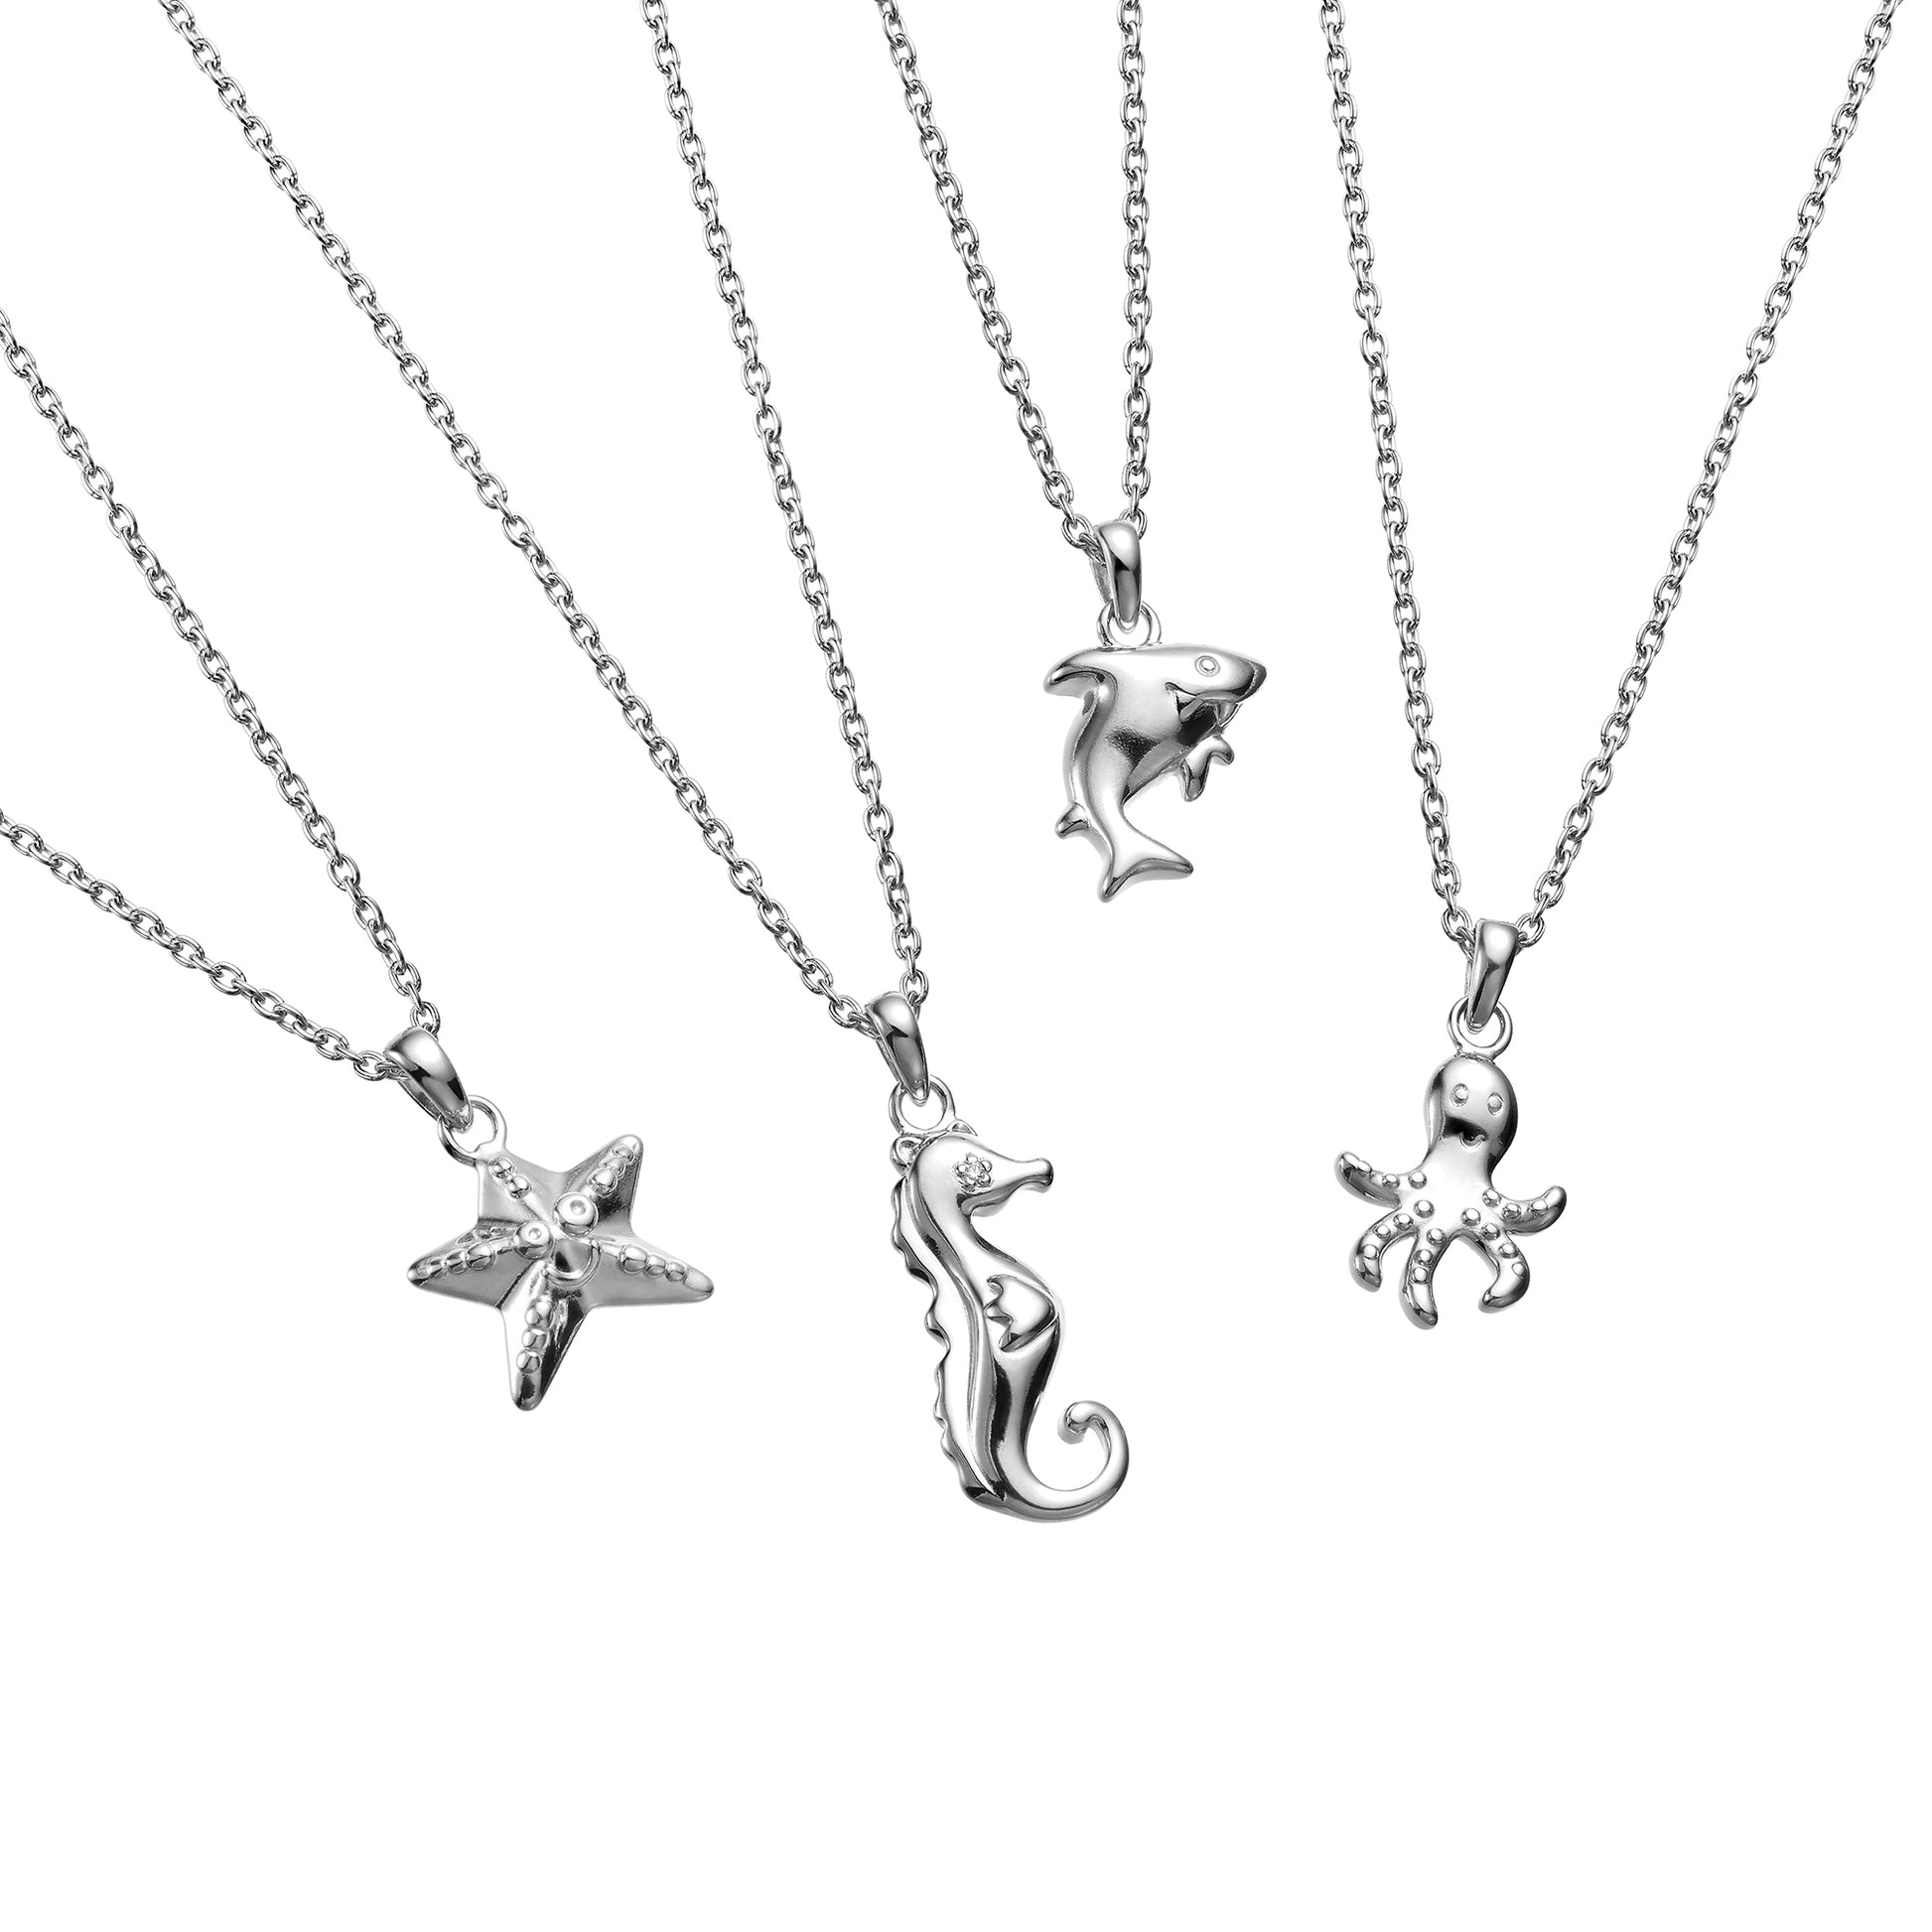 Under the Sea collection of silver necklaces including starfish, seahorse, shark and octopus all on Extendable Chain Necklaces